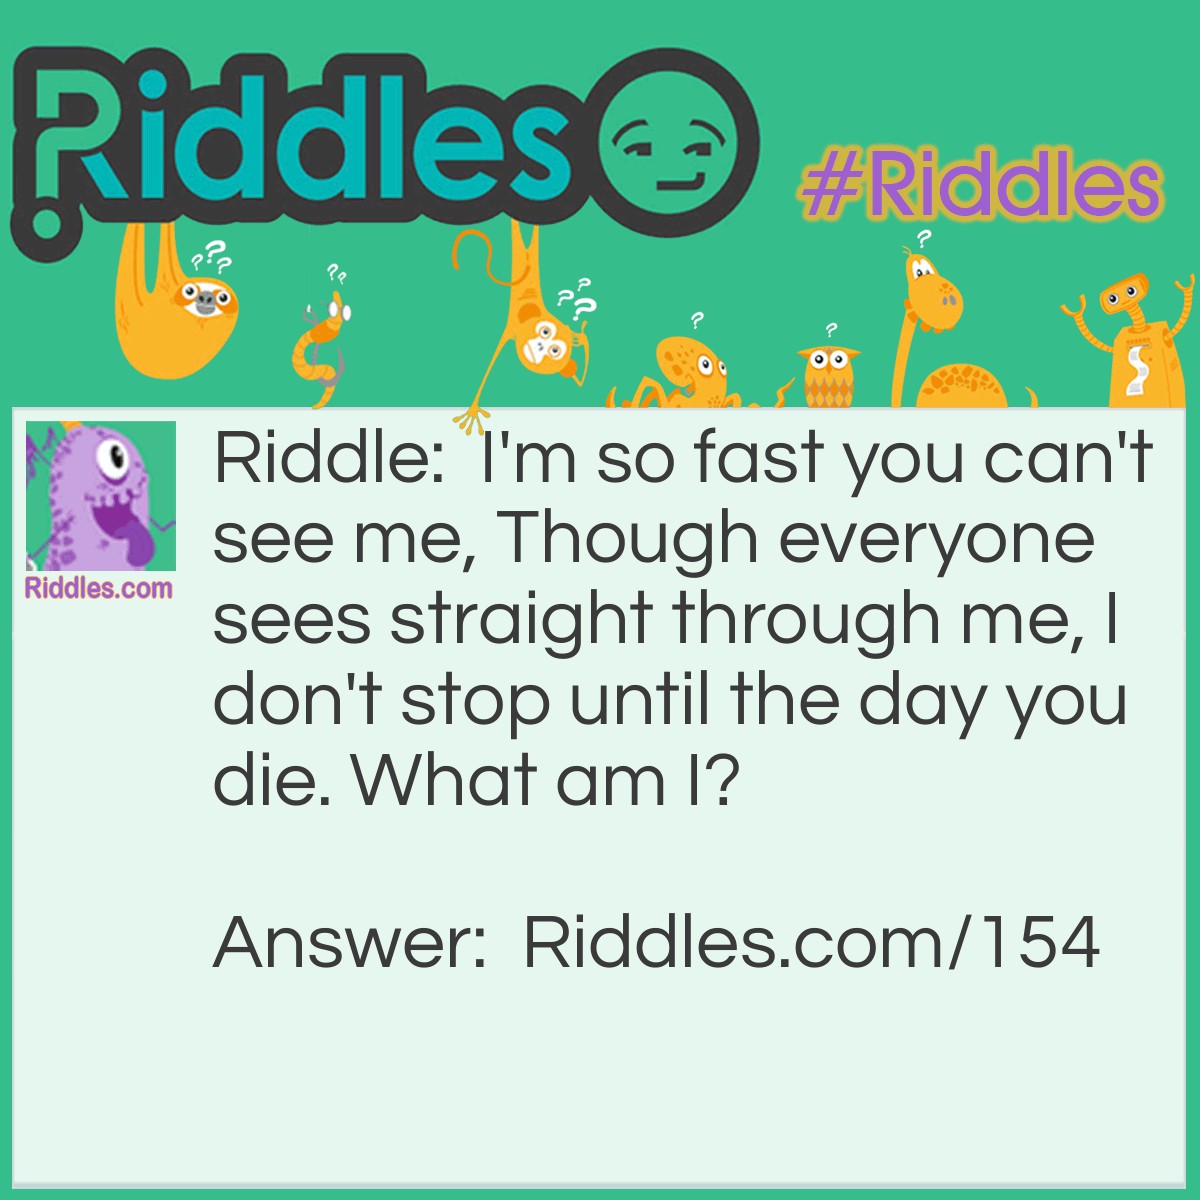 Riddle: I'm so fast you can't see me, Though everyone sees straight through me, I don't stop until the day you die. What am I? Answer: A blink of an eye.